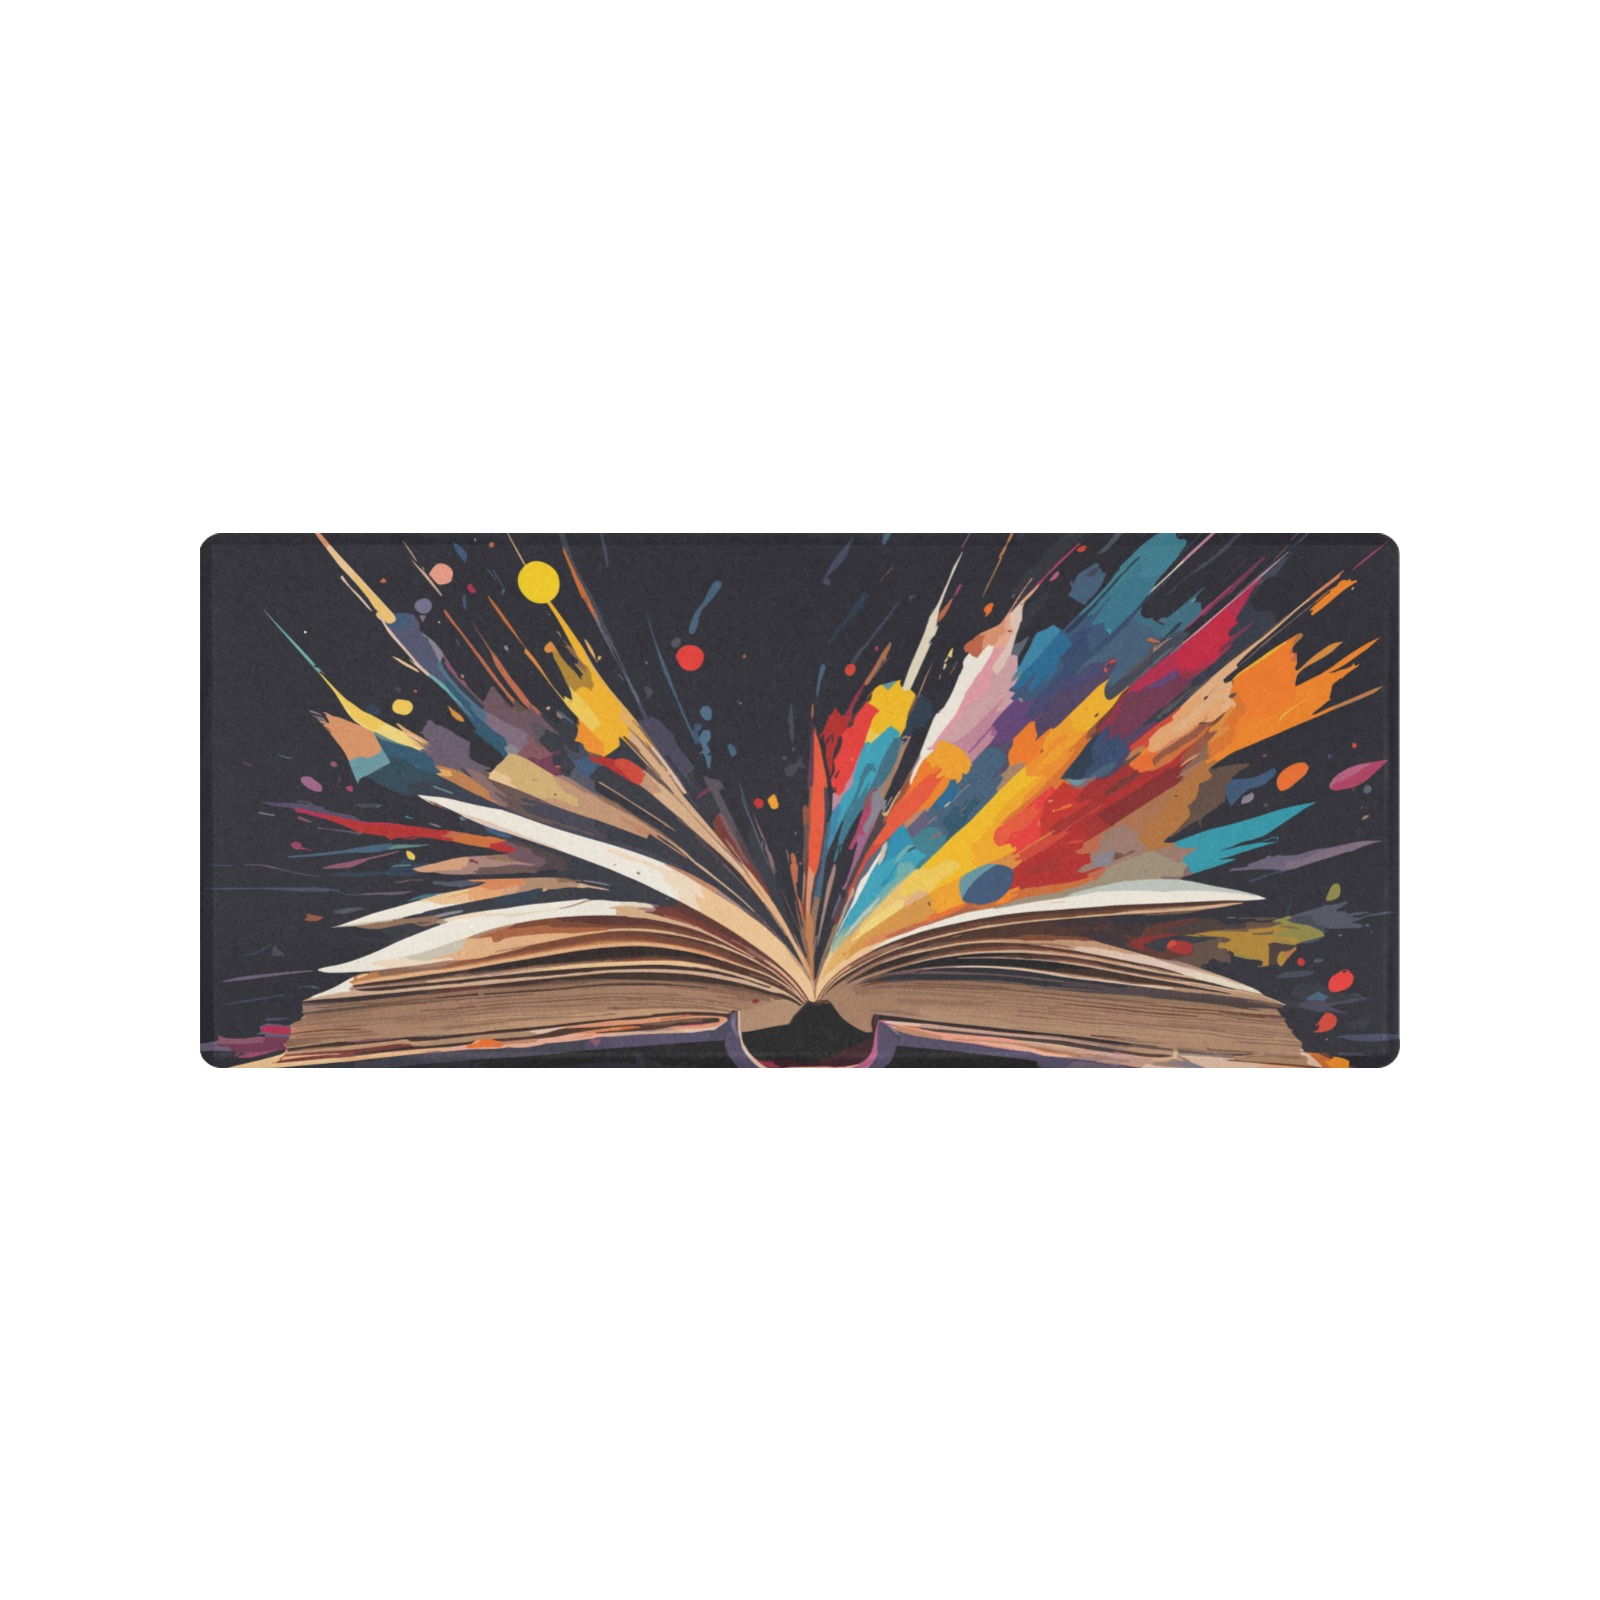 Colorful fantasy erupts from the open book art Gaming Mousepad (35"x16")